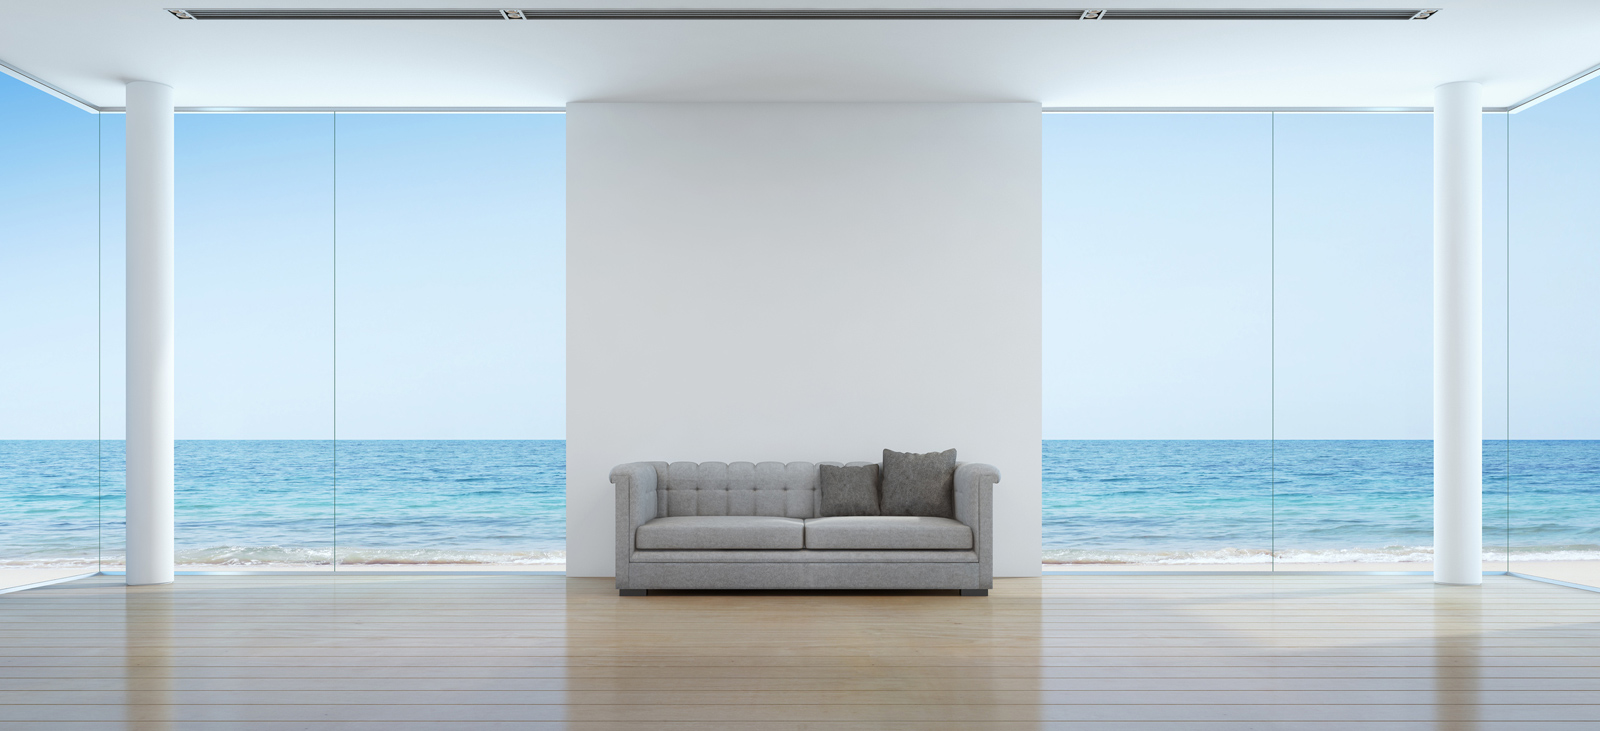 Sofa in the middle of a luxury living room surrounded by water